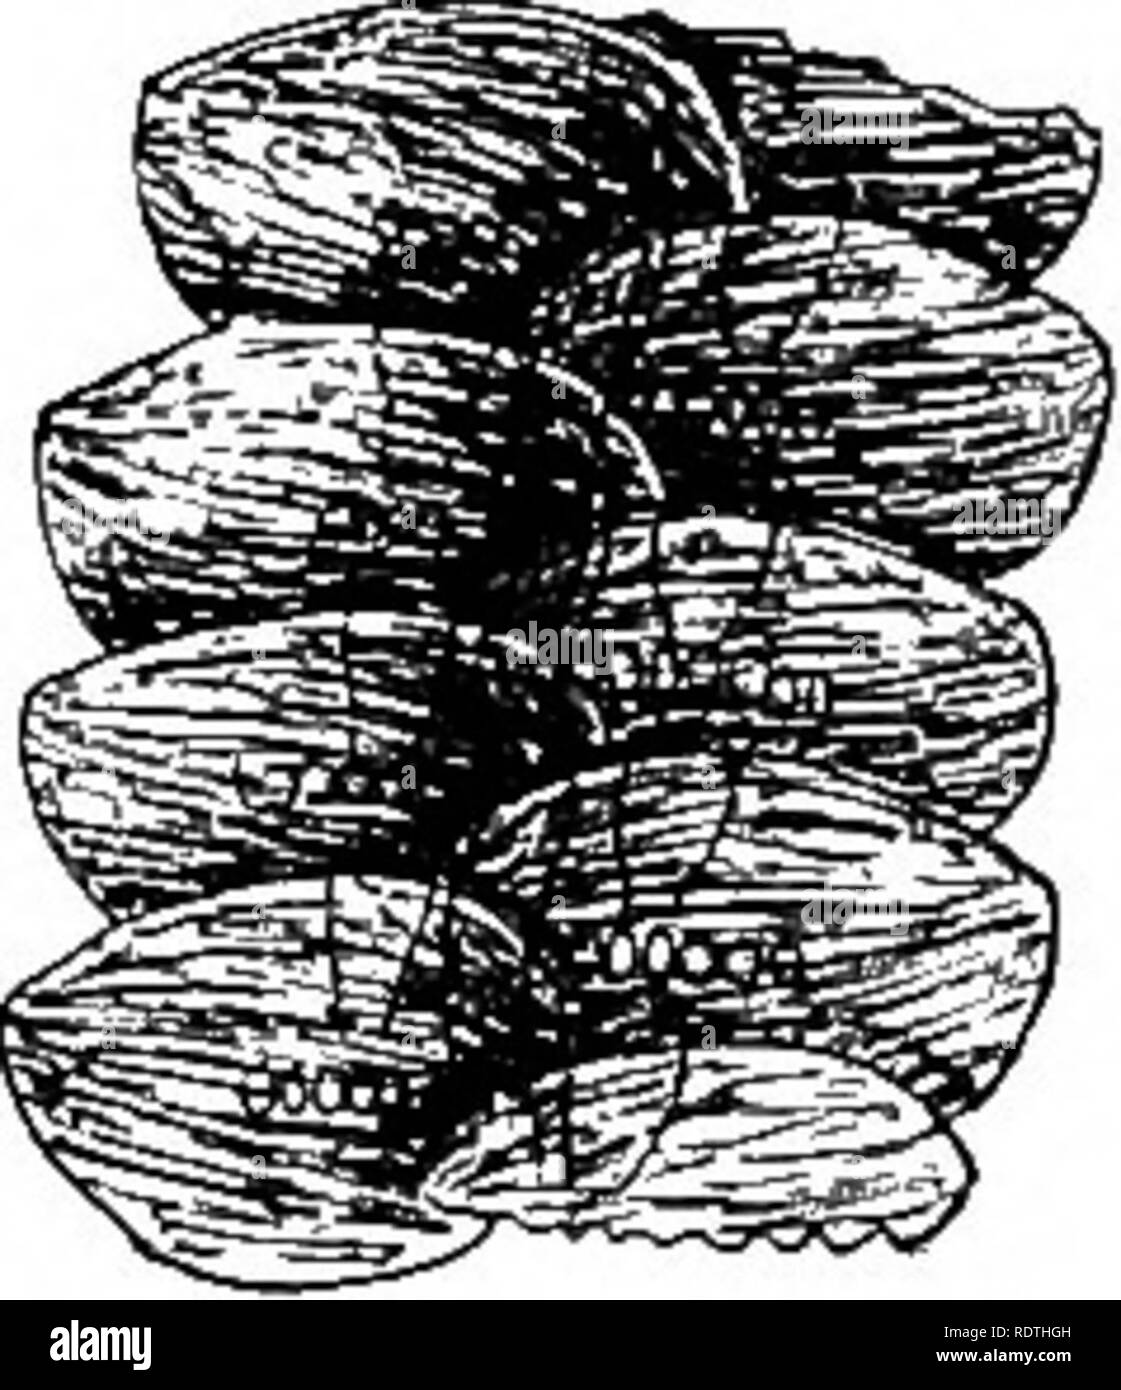 . Elementary botany. Botany. Fig. 62. Fig. 60. Portion of plant of Frullania, a foliose liverwort. Fig. 61. Portion of same more highly magni- fied, showing over- lapping leaves. Under side showing forked nutriment IS under row of leaves and lobes absorbed. of lateral leaves. 170. Nutrition of the mosses.—Among the mosses which are usually common in moist and shaded situations, examples are abundant which are suitable for the study of the organs of absorption. If we take for example a plant of Mnium (M. affine) which is illustrated in fig. 64, we note that it consists of a slender axis with th Stock Photo